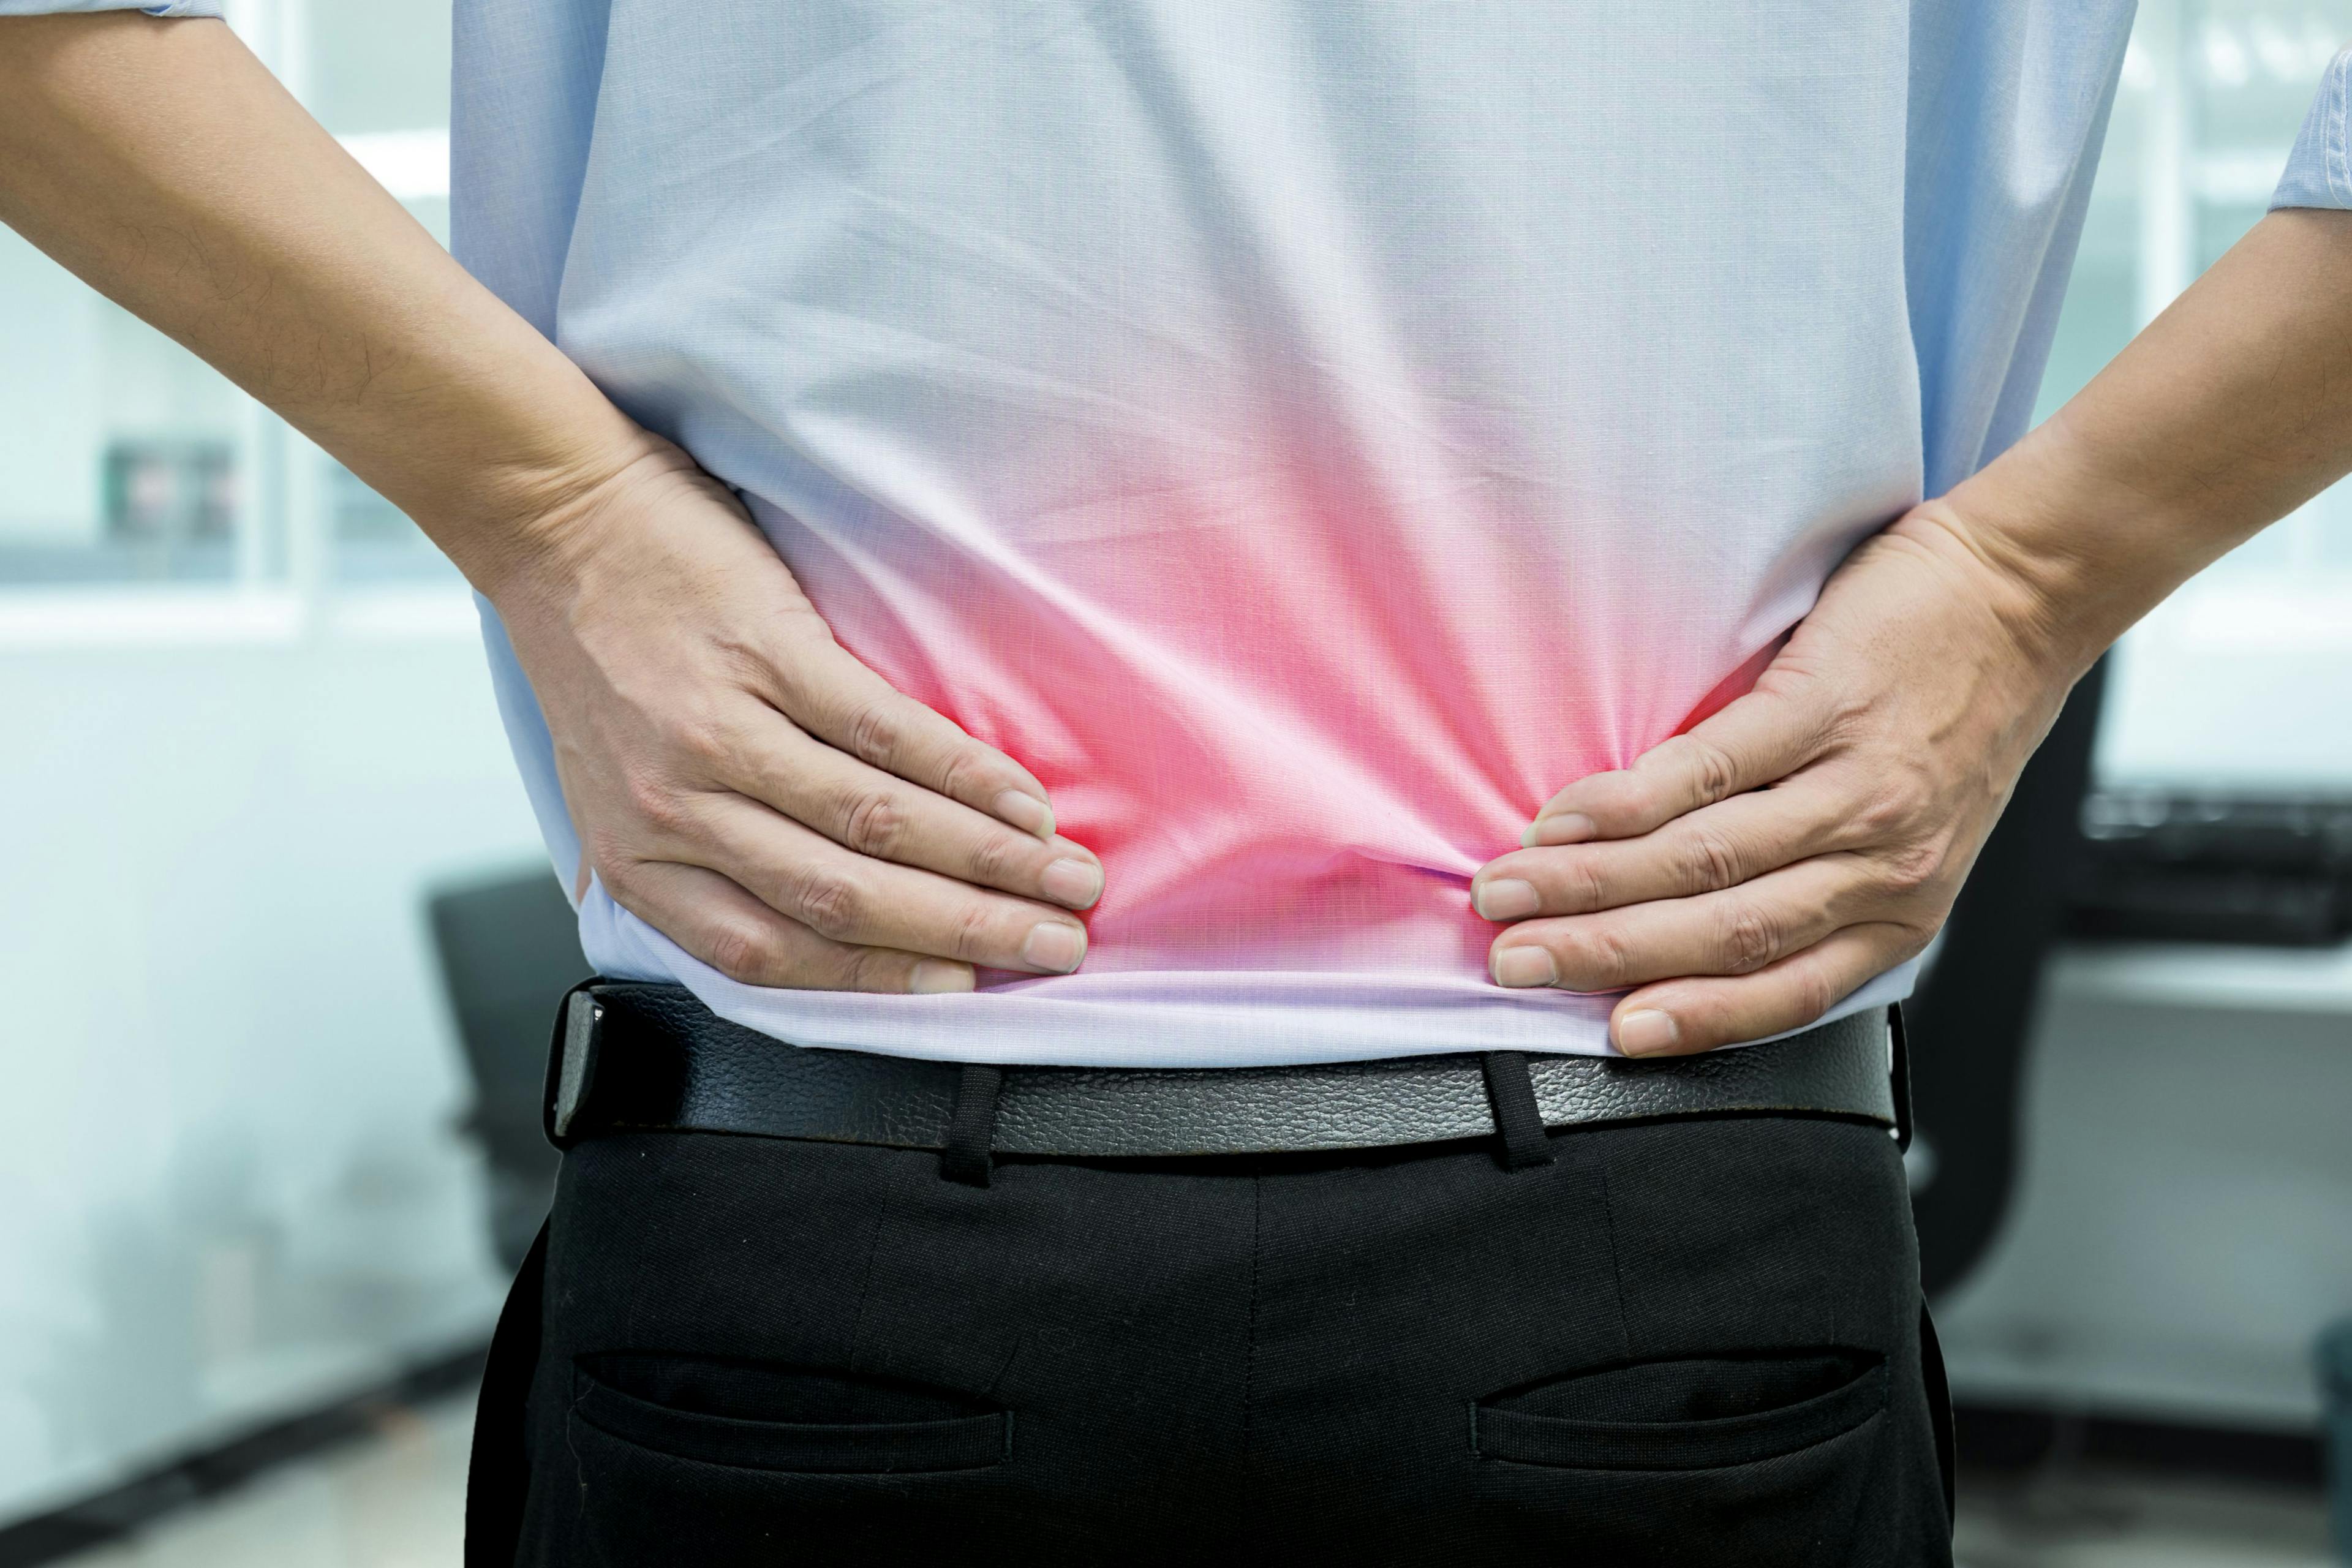 Axial spondyloarthritis (axSpA) is a type of arthritis primarily impacting the spine and sacroiliac joint. | Image credit: Mantinov - stock.adobe.com